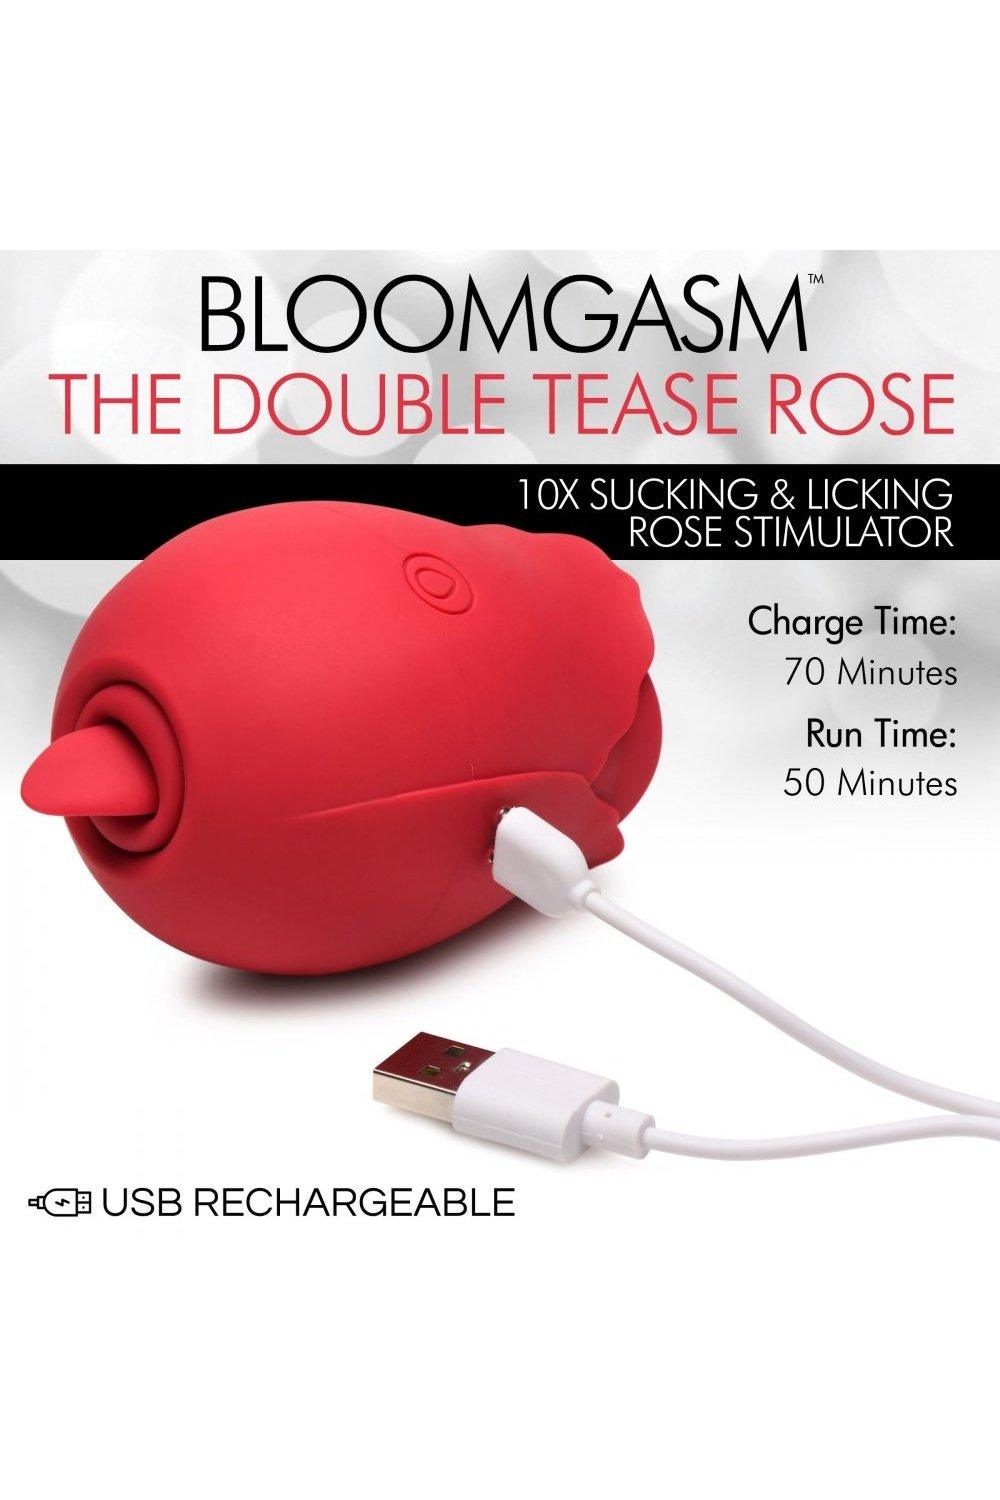 The Double Tease Rose 10X Sucking and Licking Silicone Stimulator - Sex On the Go